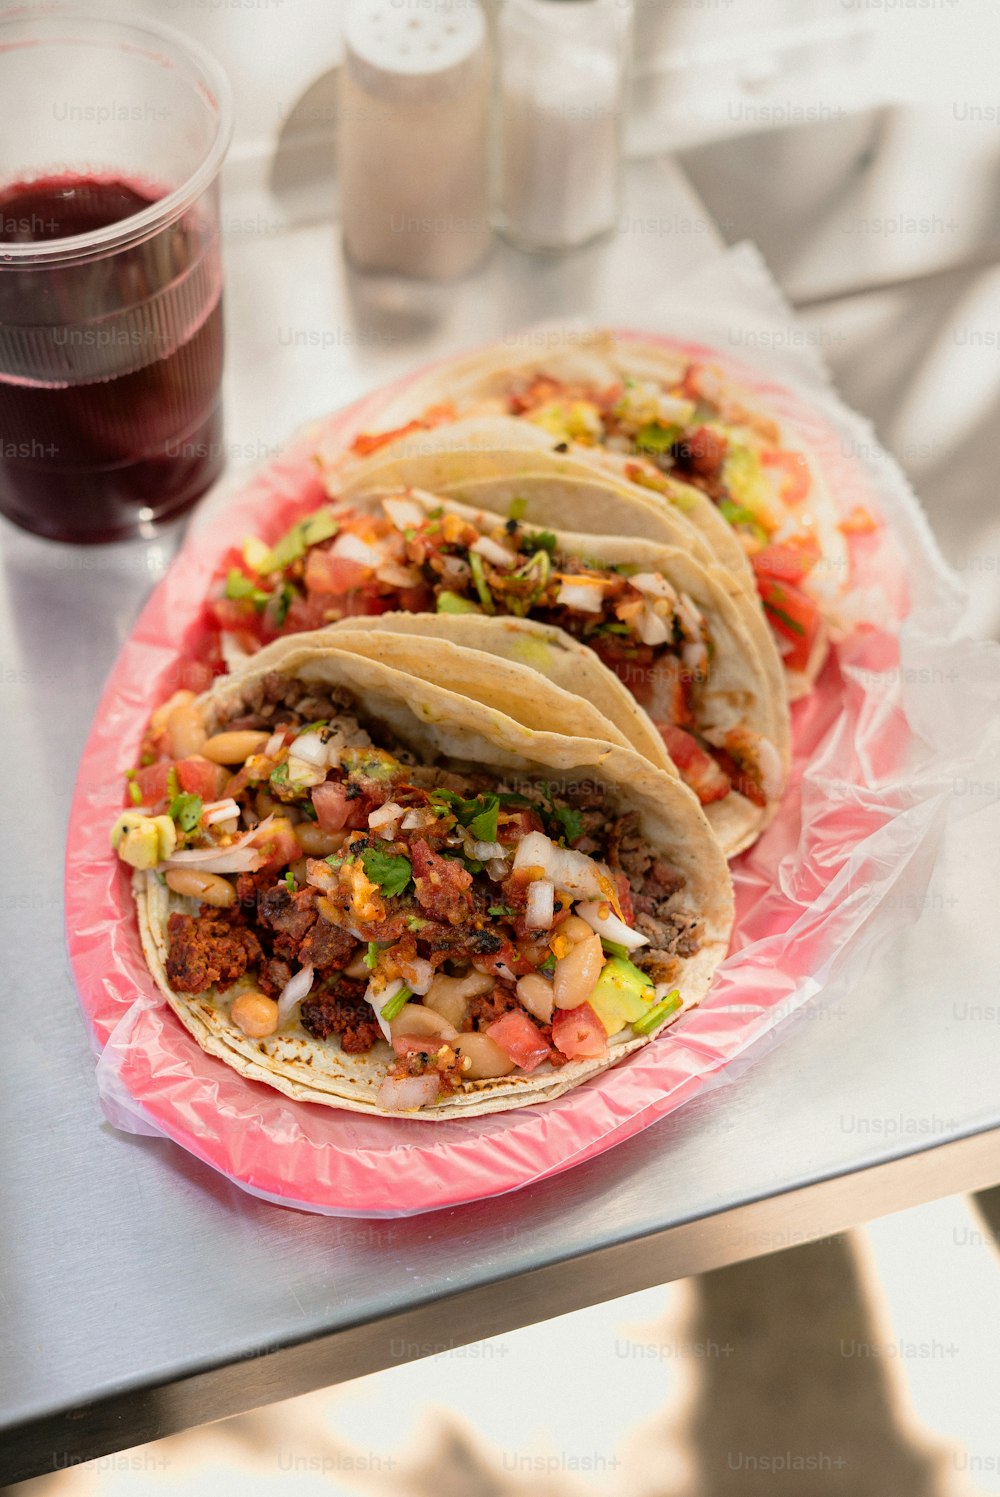 three tacos sitting on a pink plate next to a drink